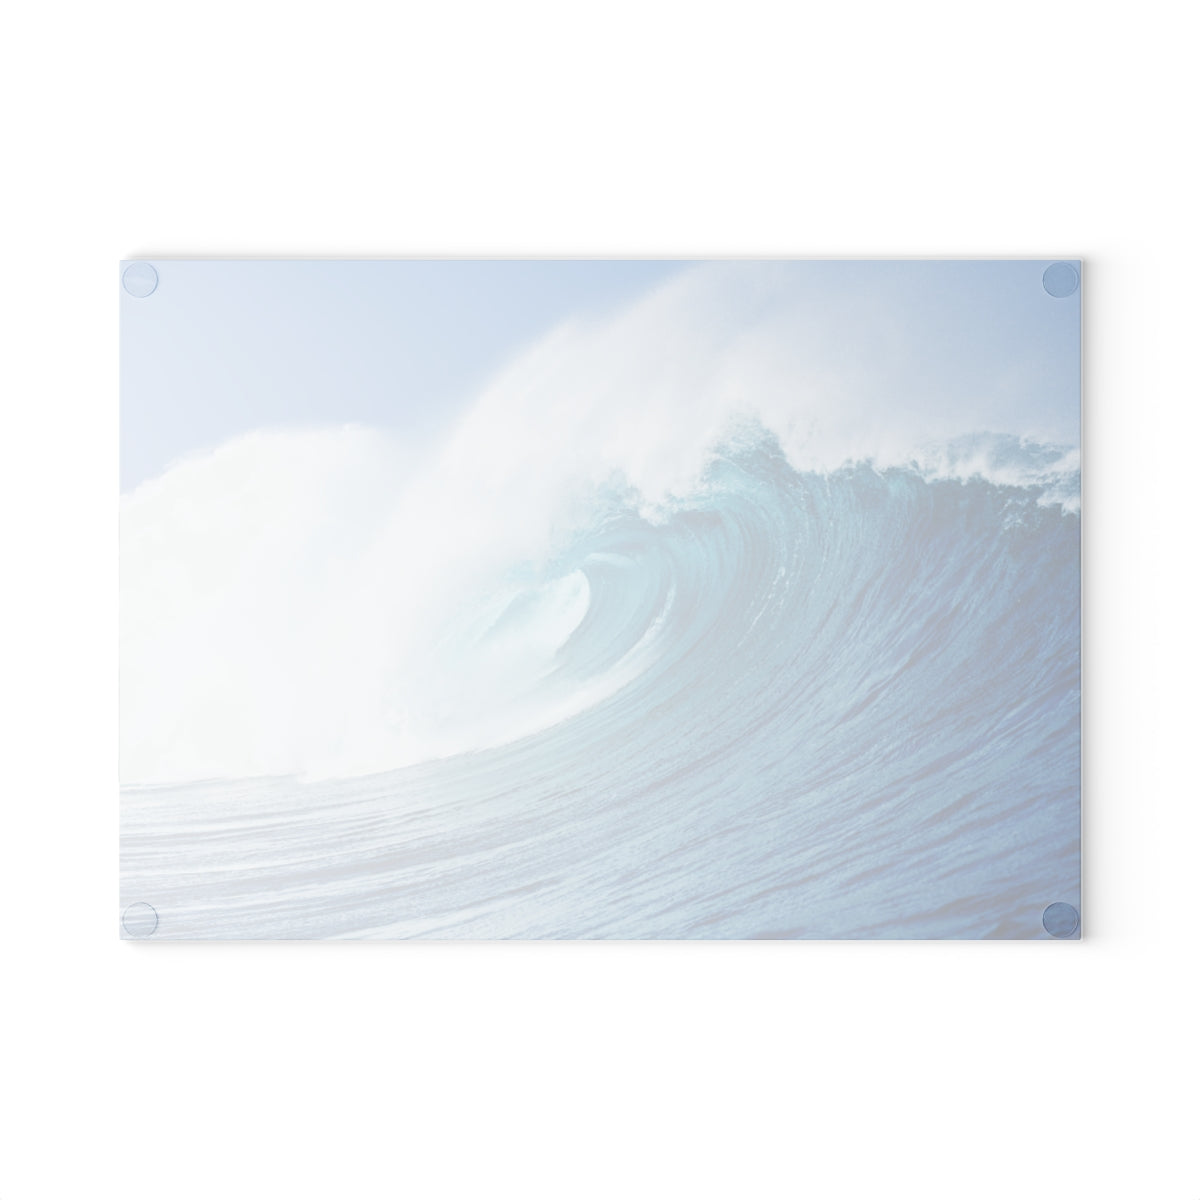 Glass Cutting Board, Curling Wave - Two Sizes Available!